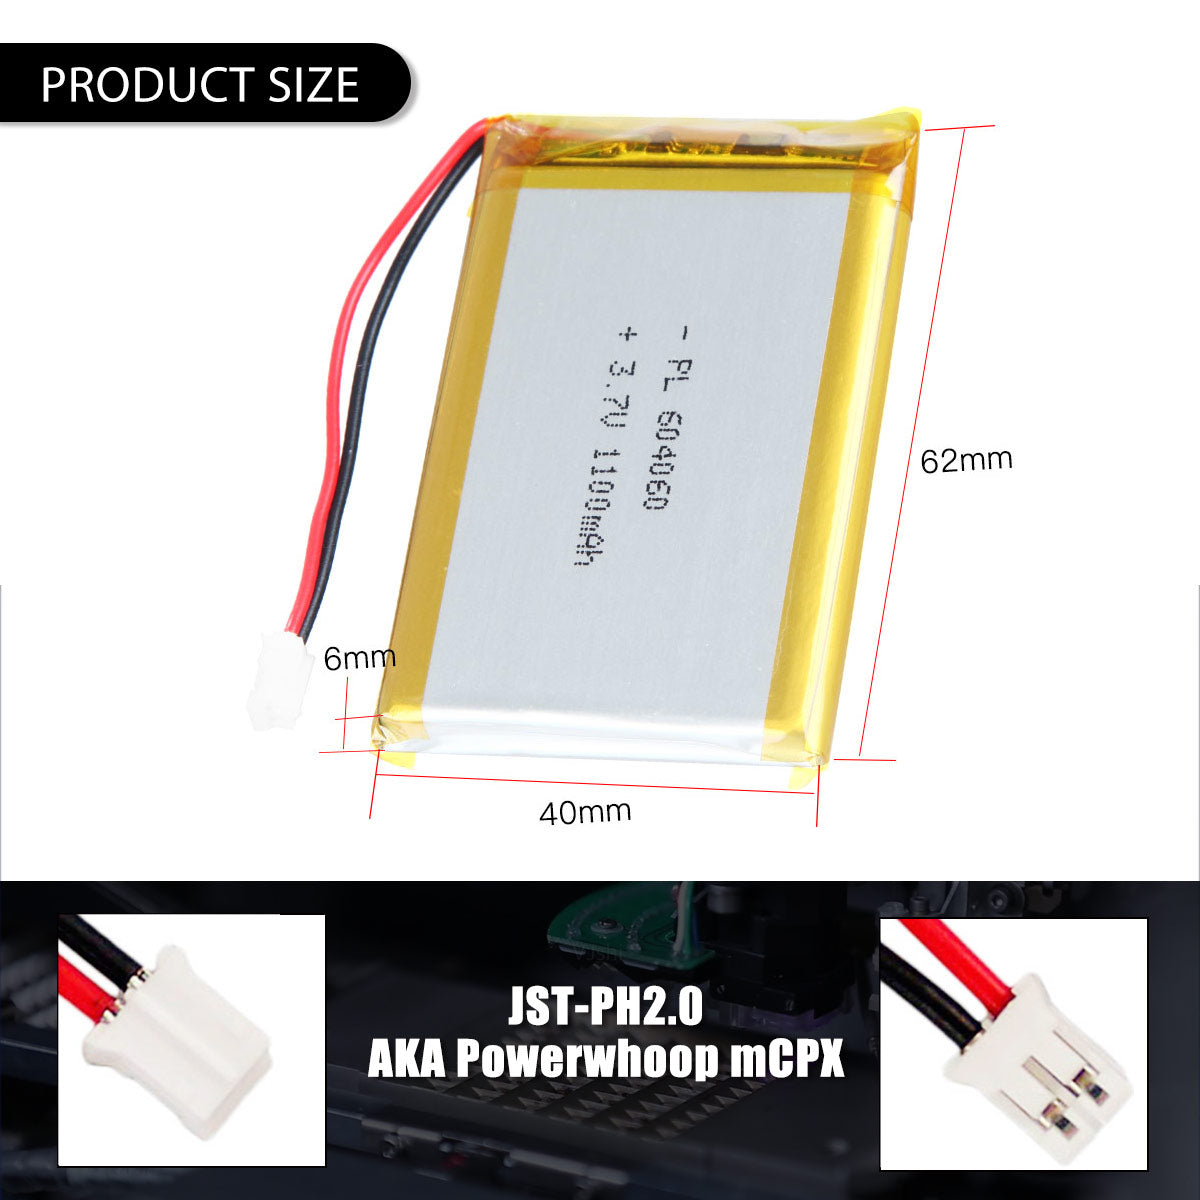 3.7V 1100mAh 604060 Rechargeable Lithium Polymer Battery